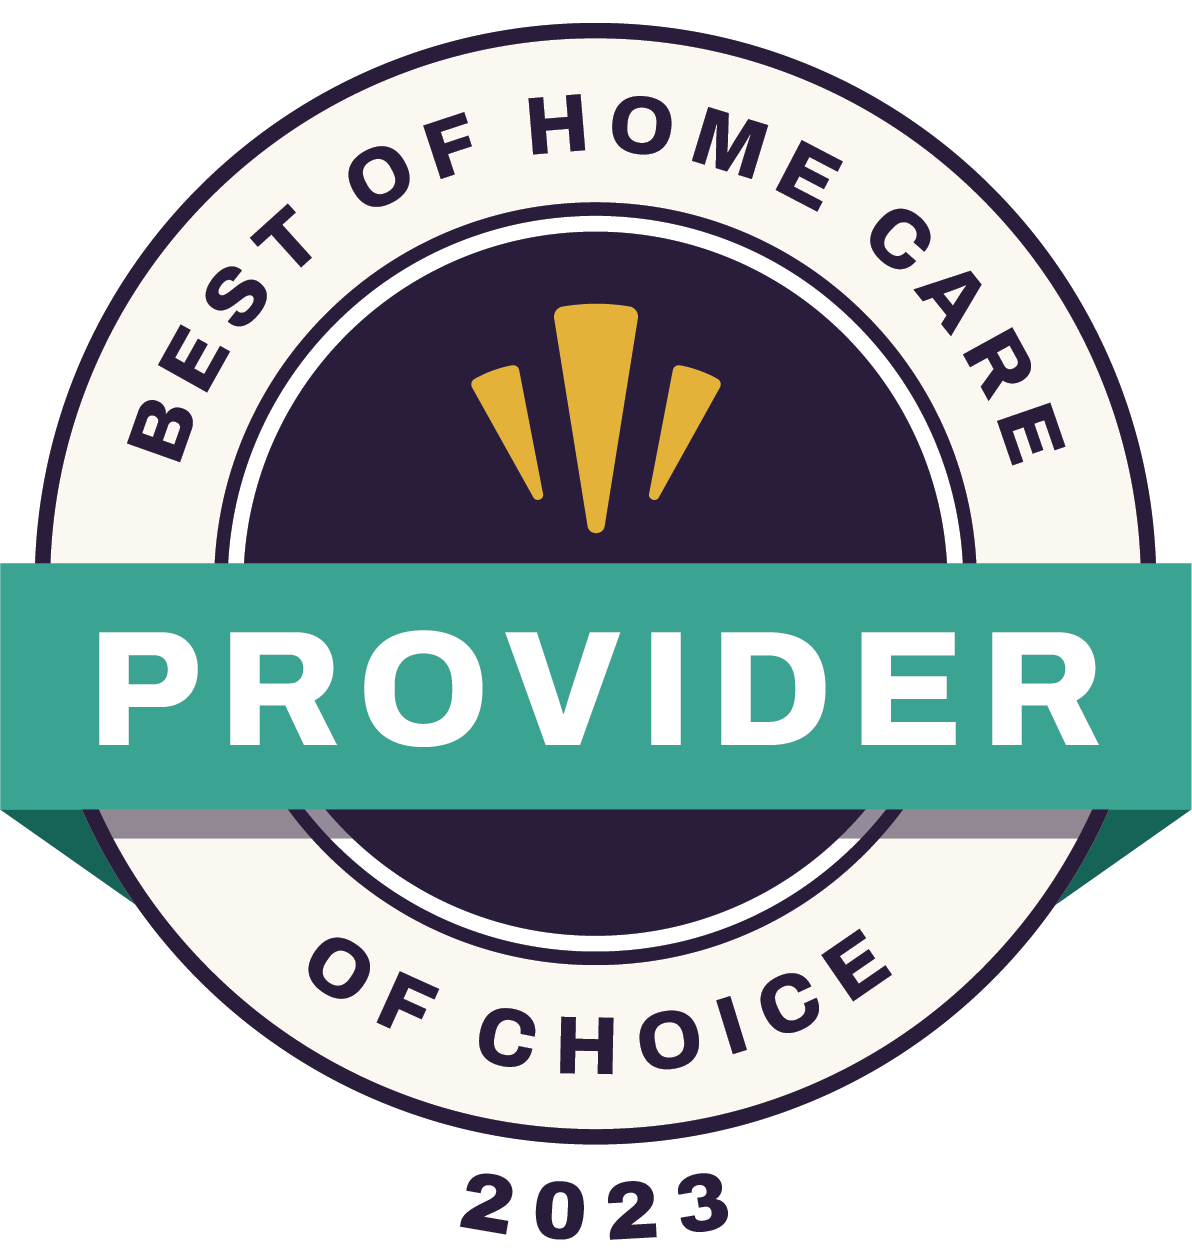 Inspired Care Solutions in Boerne, Texas is 2023 Home Care Provider of Choice